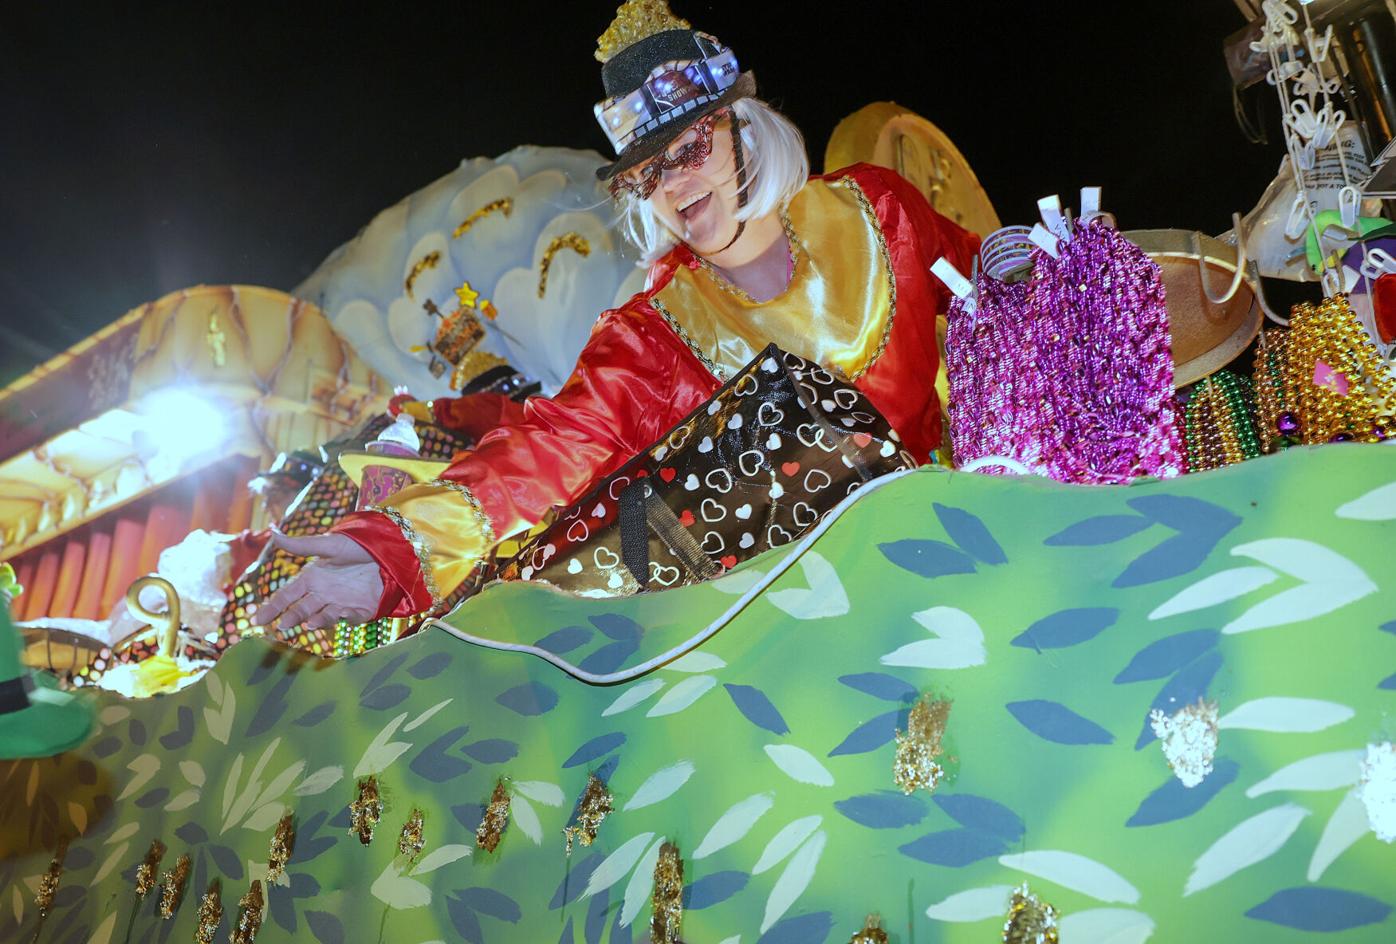 Photos: The Krewe of Isis parades through the streets of Kenner